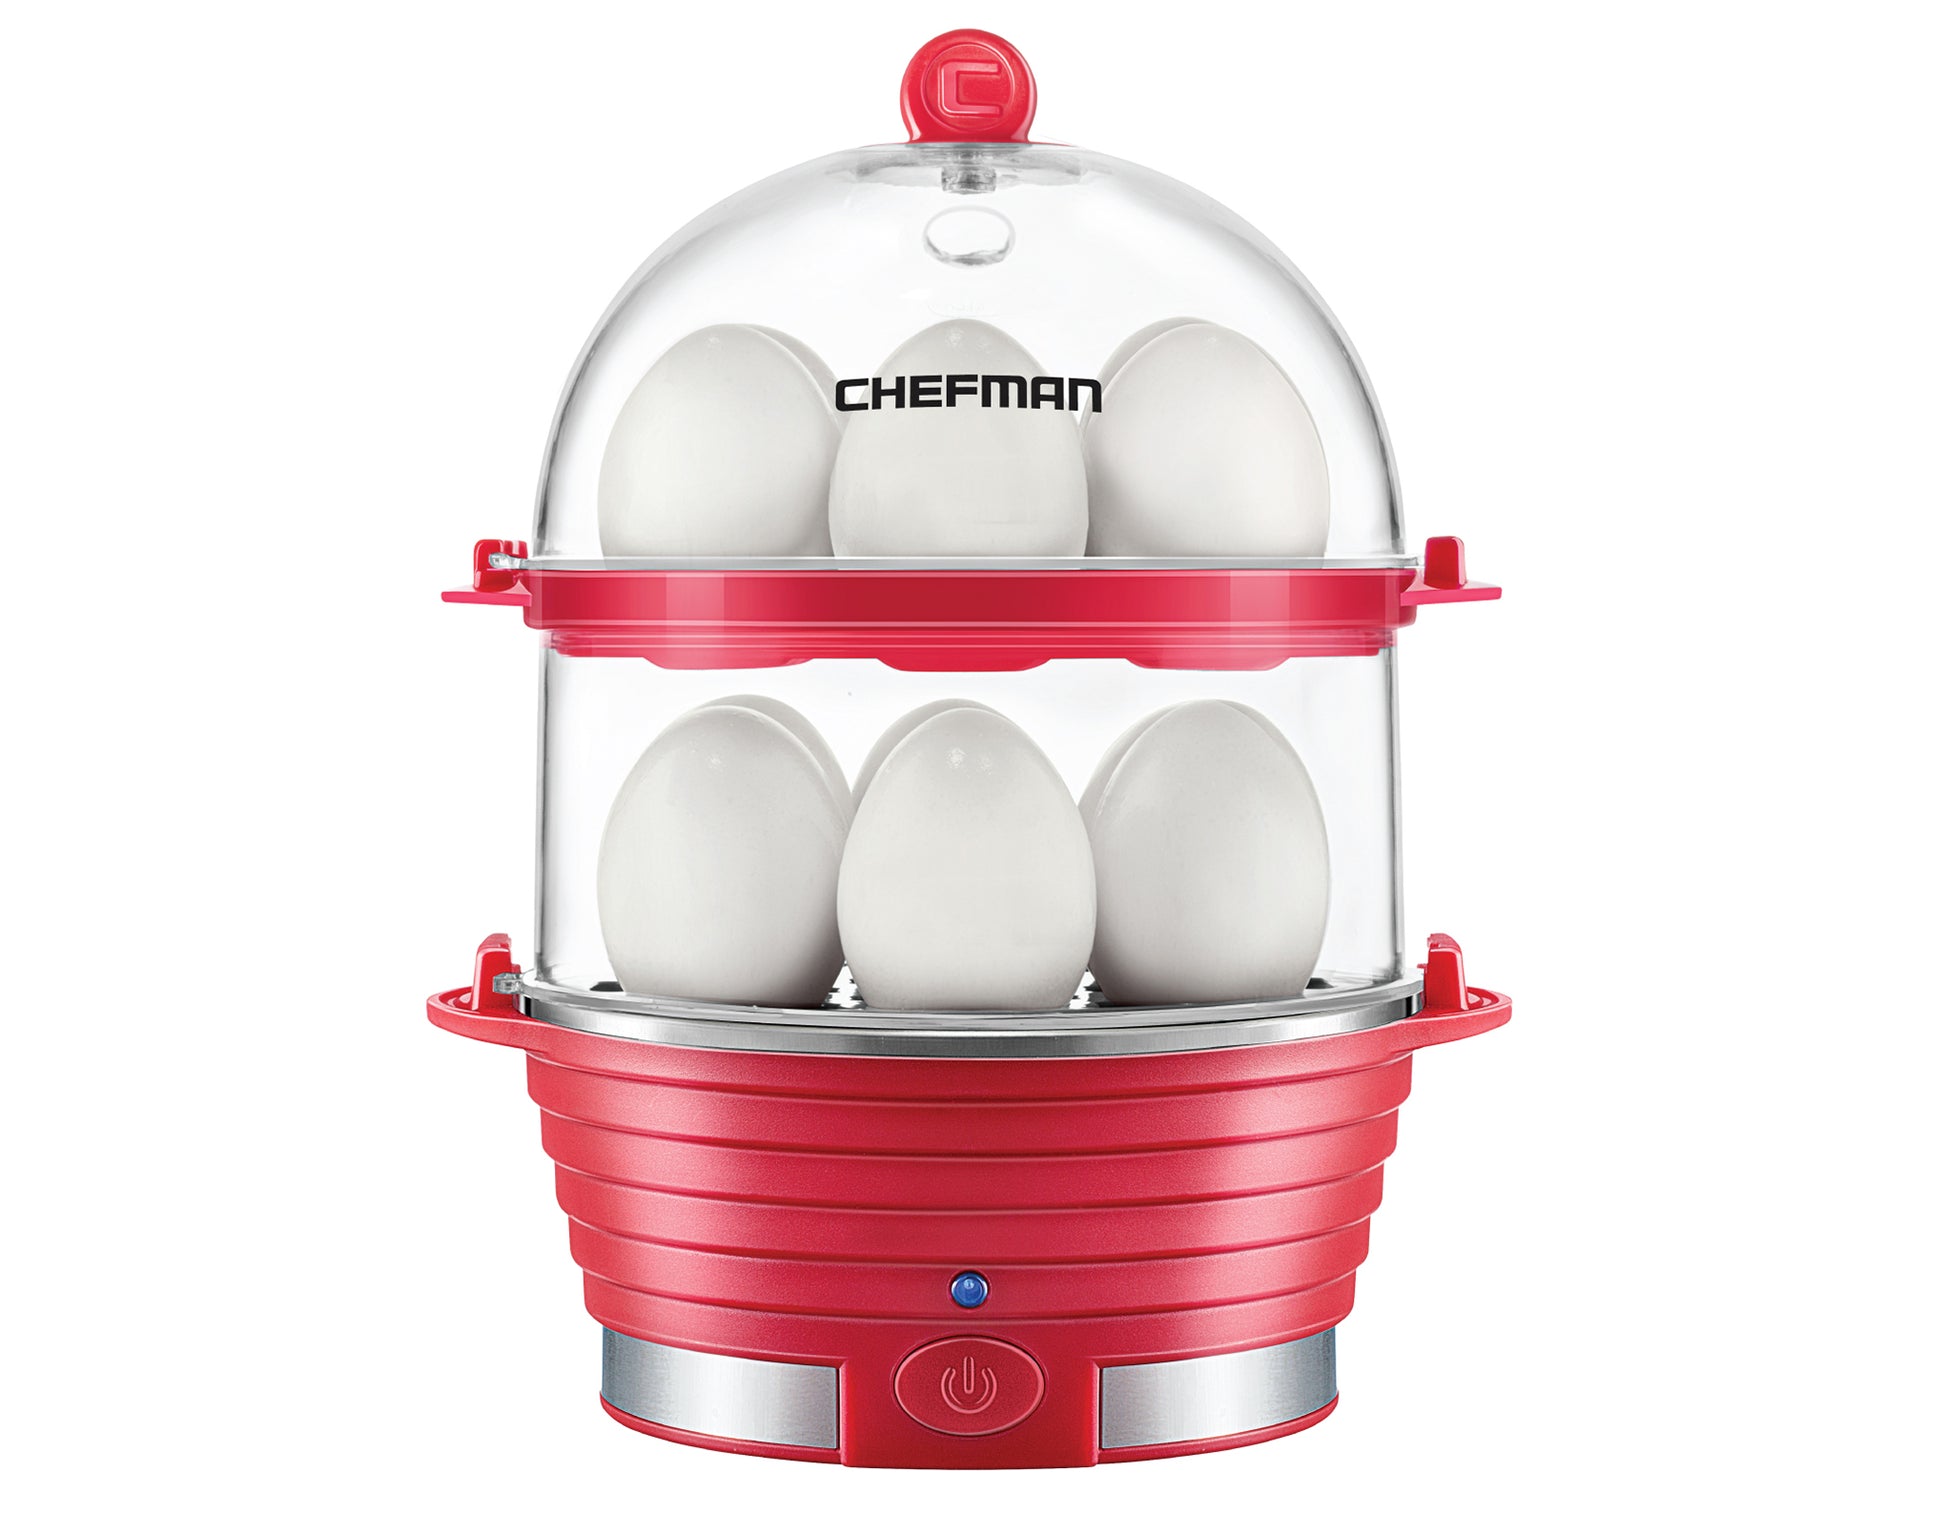 Chefman Double Decker Electric Egg Cooker - Red